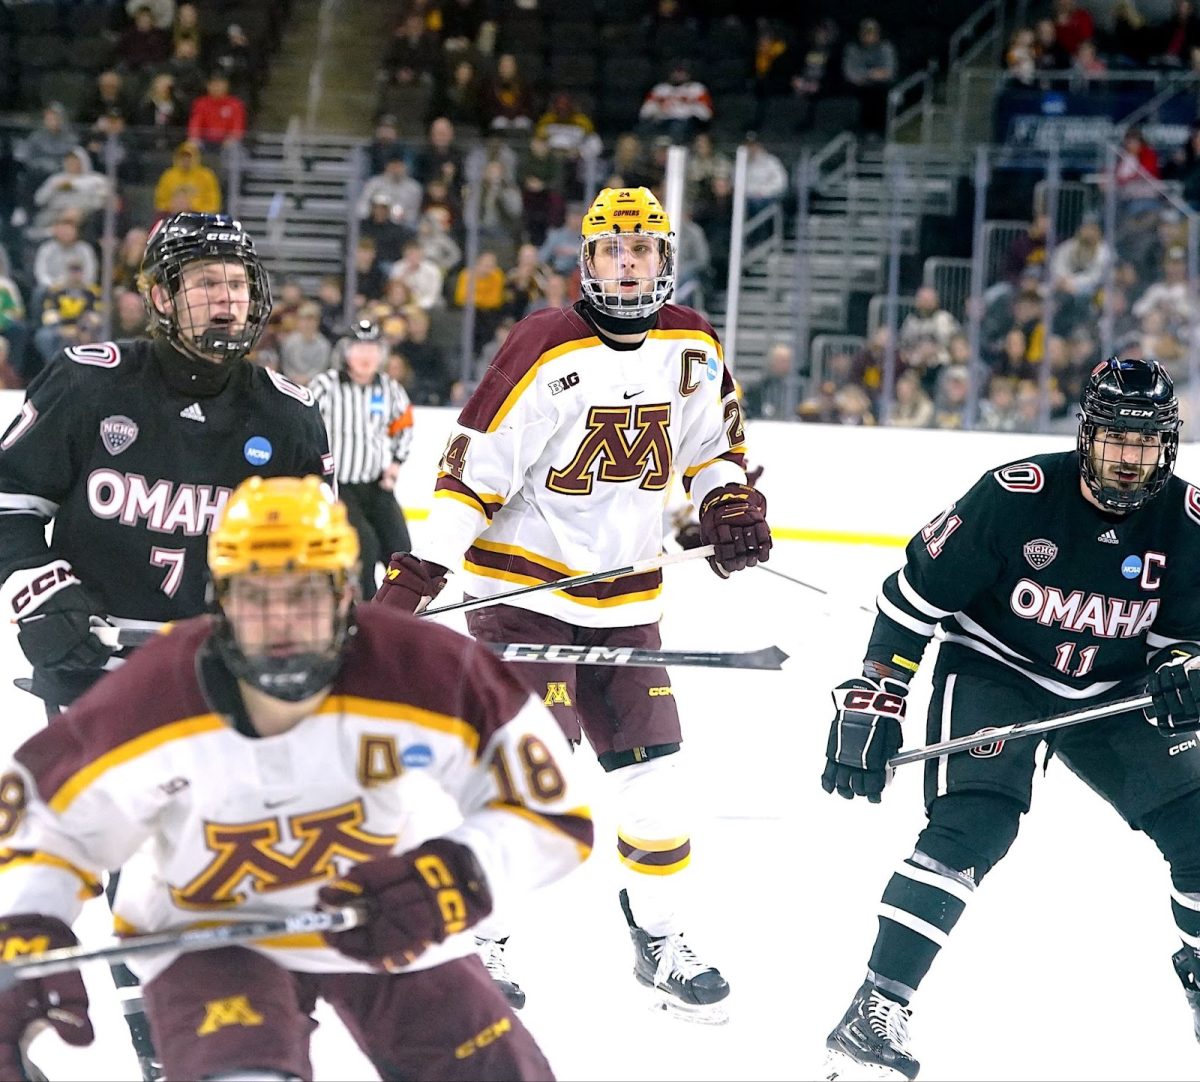 The Gophers will face off against Boston University on Saturday after their win over the Mavericks.